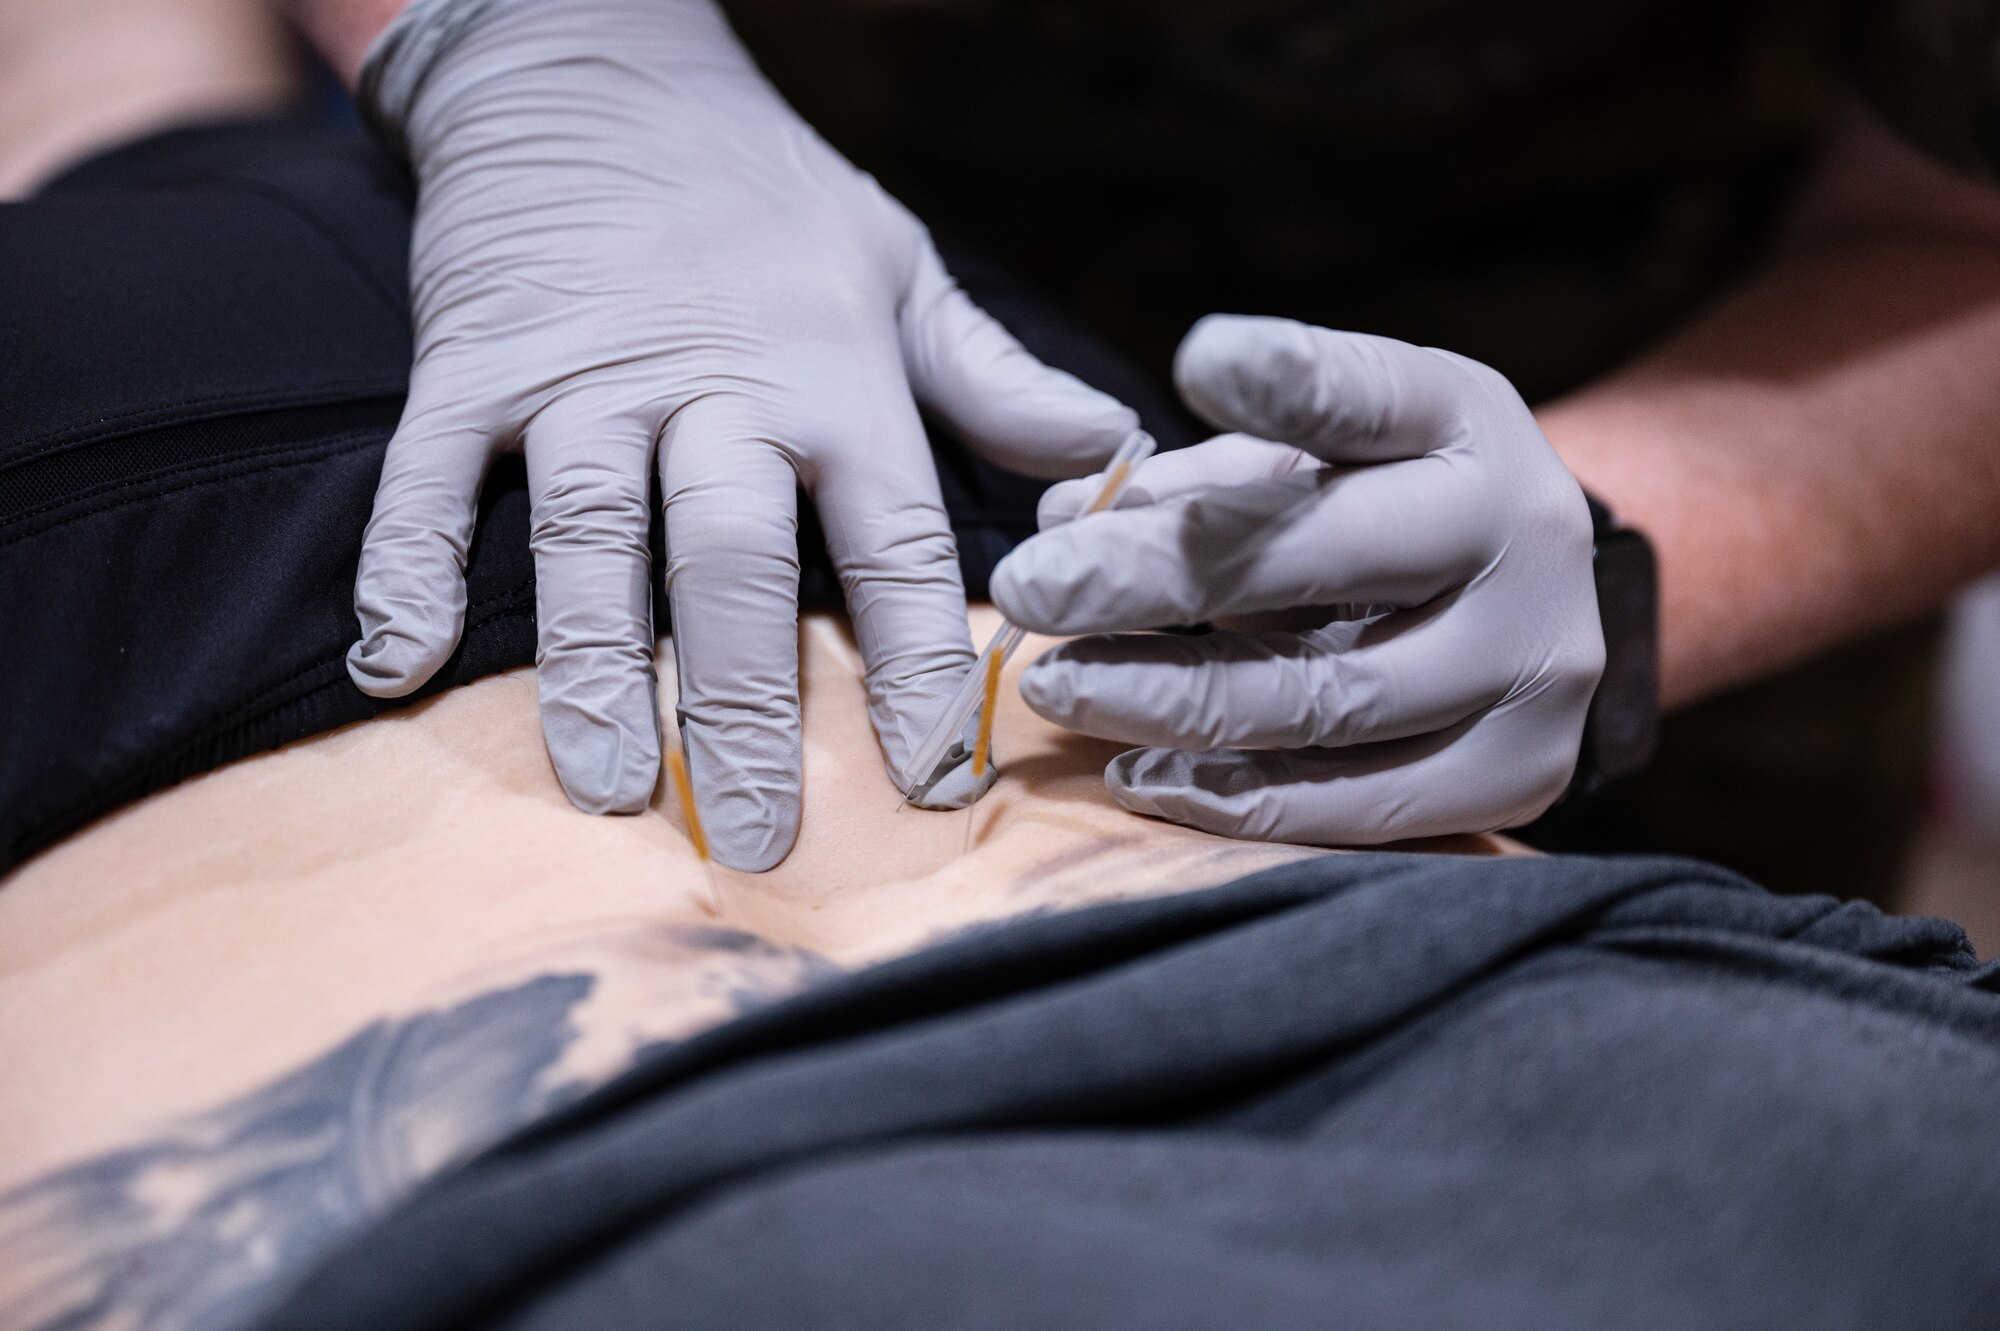 U.S. Air Force Captain Kara Heath, a physical therapist from the 379th Expeditionary Operational Medical Readiness Squadron, Al Udeid Air Base, Qatar, uses dry needling on an Airman’s lower back to activate trigger points which help to alleviate pain, June 10, 2022. Being treated with dry needling is one of several facets of the treatment this Airman received as part of his physical therapy treatment session. (U.S. Air Force photo by Staff Sgt. Dana Tourtellotte)